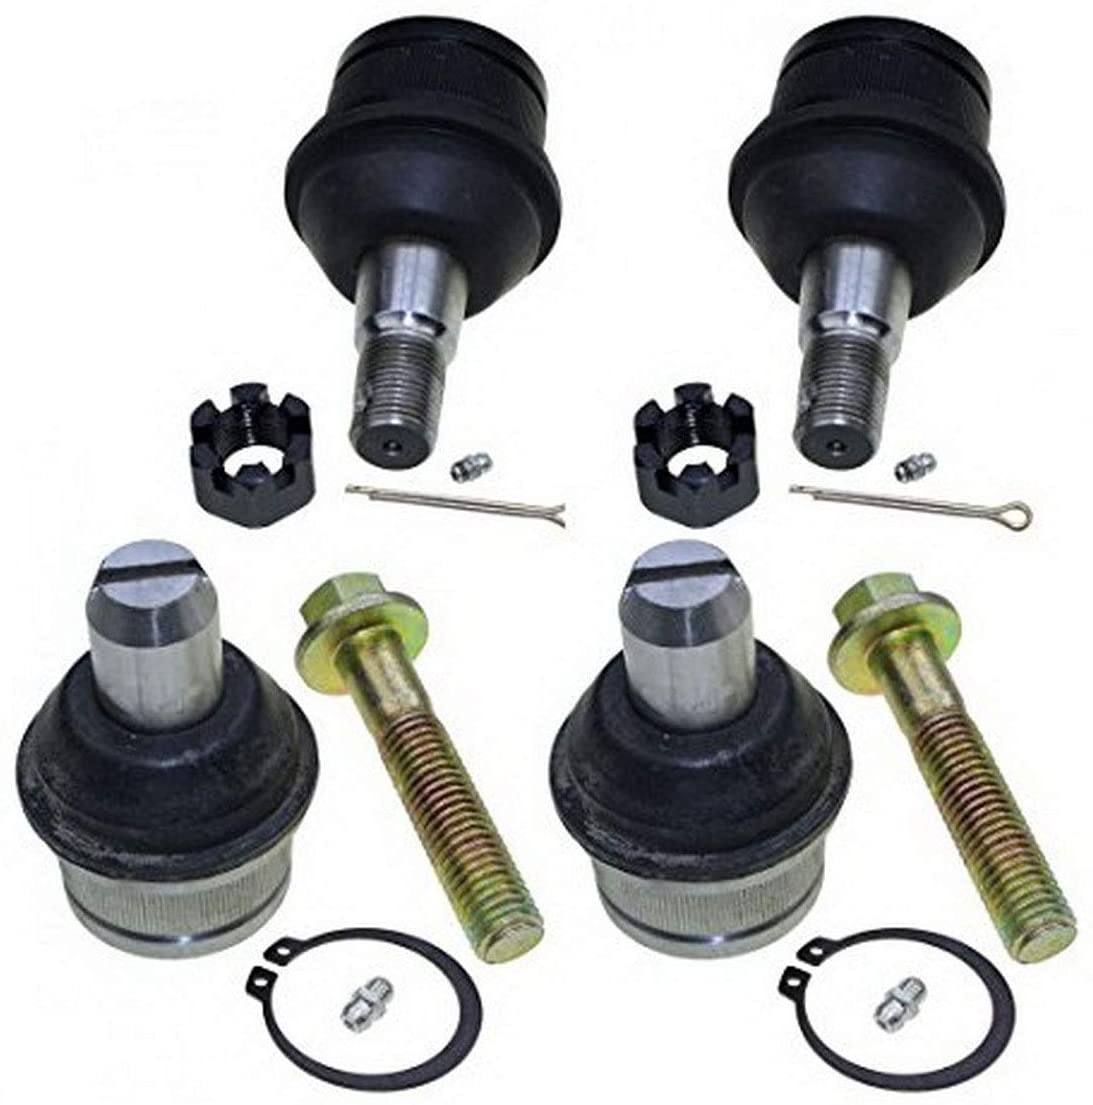 DLZ 4 Pcs Front Suspension Kit-Upper Lower Front Ball Joint Compatible with Explorer RWD 1991-1994, Ranger RWD 1989-1997, B2300 B4000 RWD 1994-1997, B3000 RWD 1994-1996